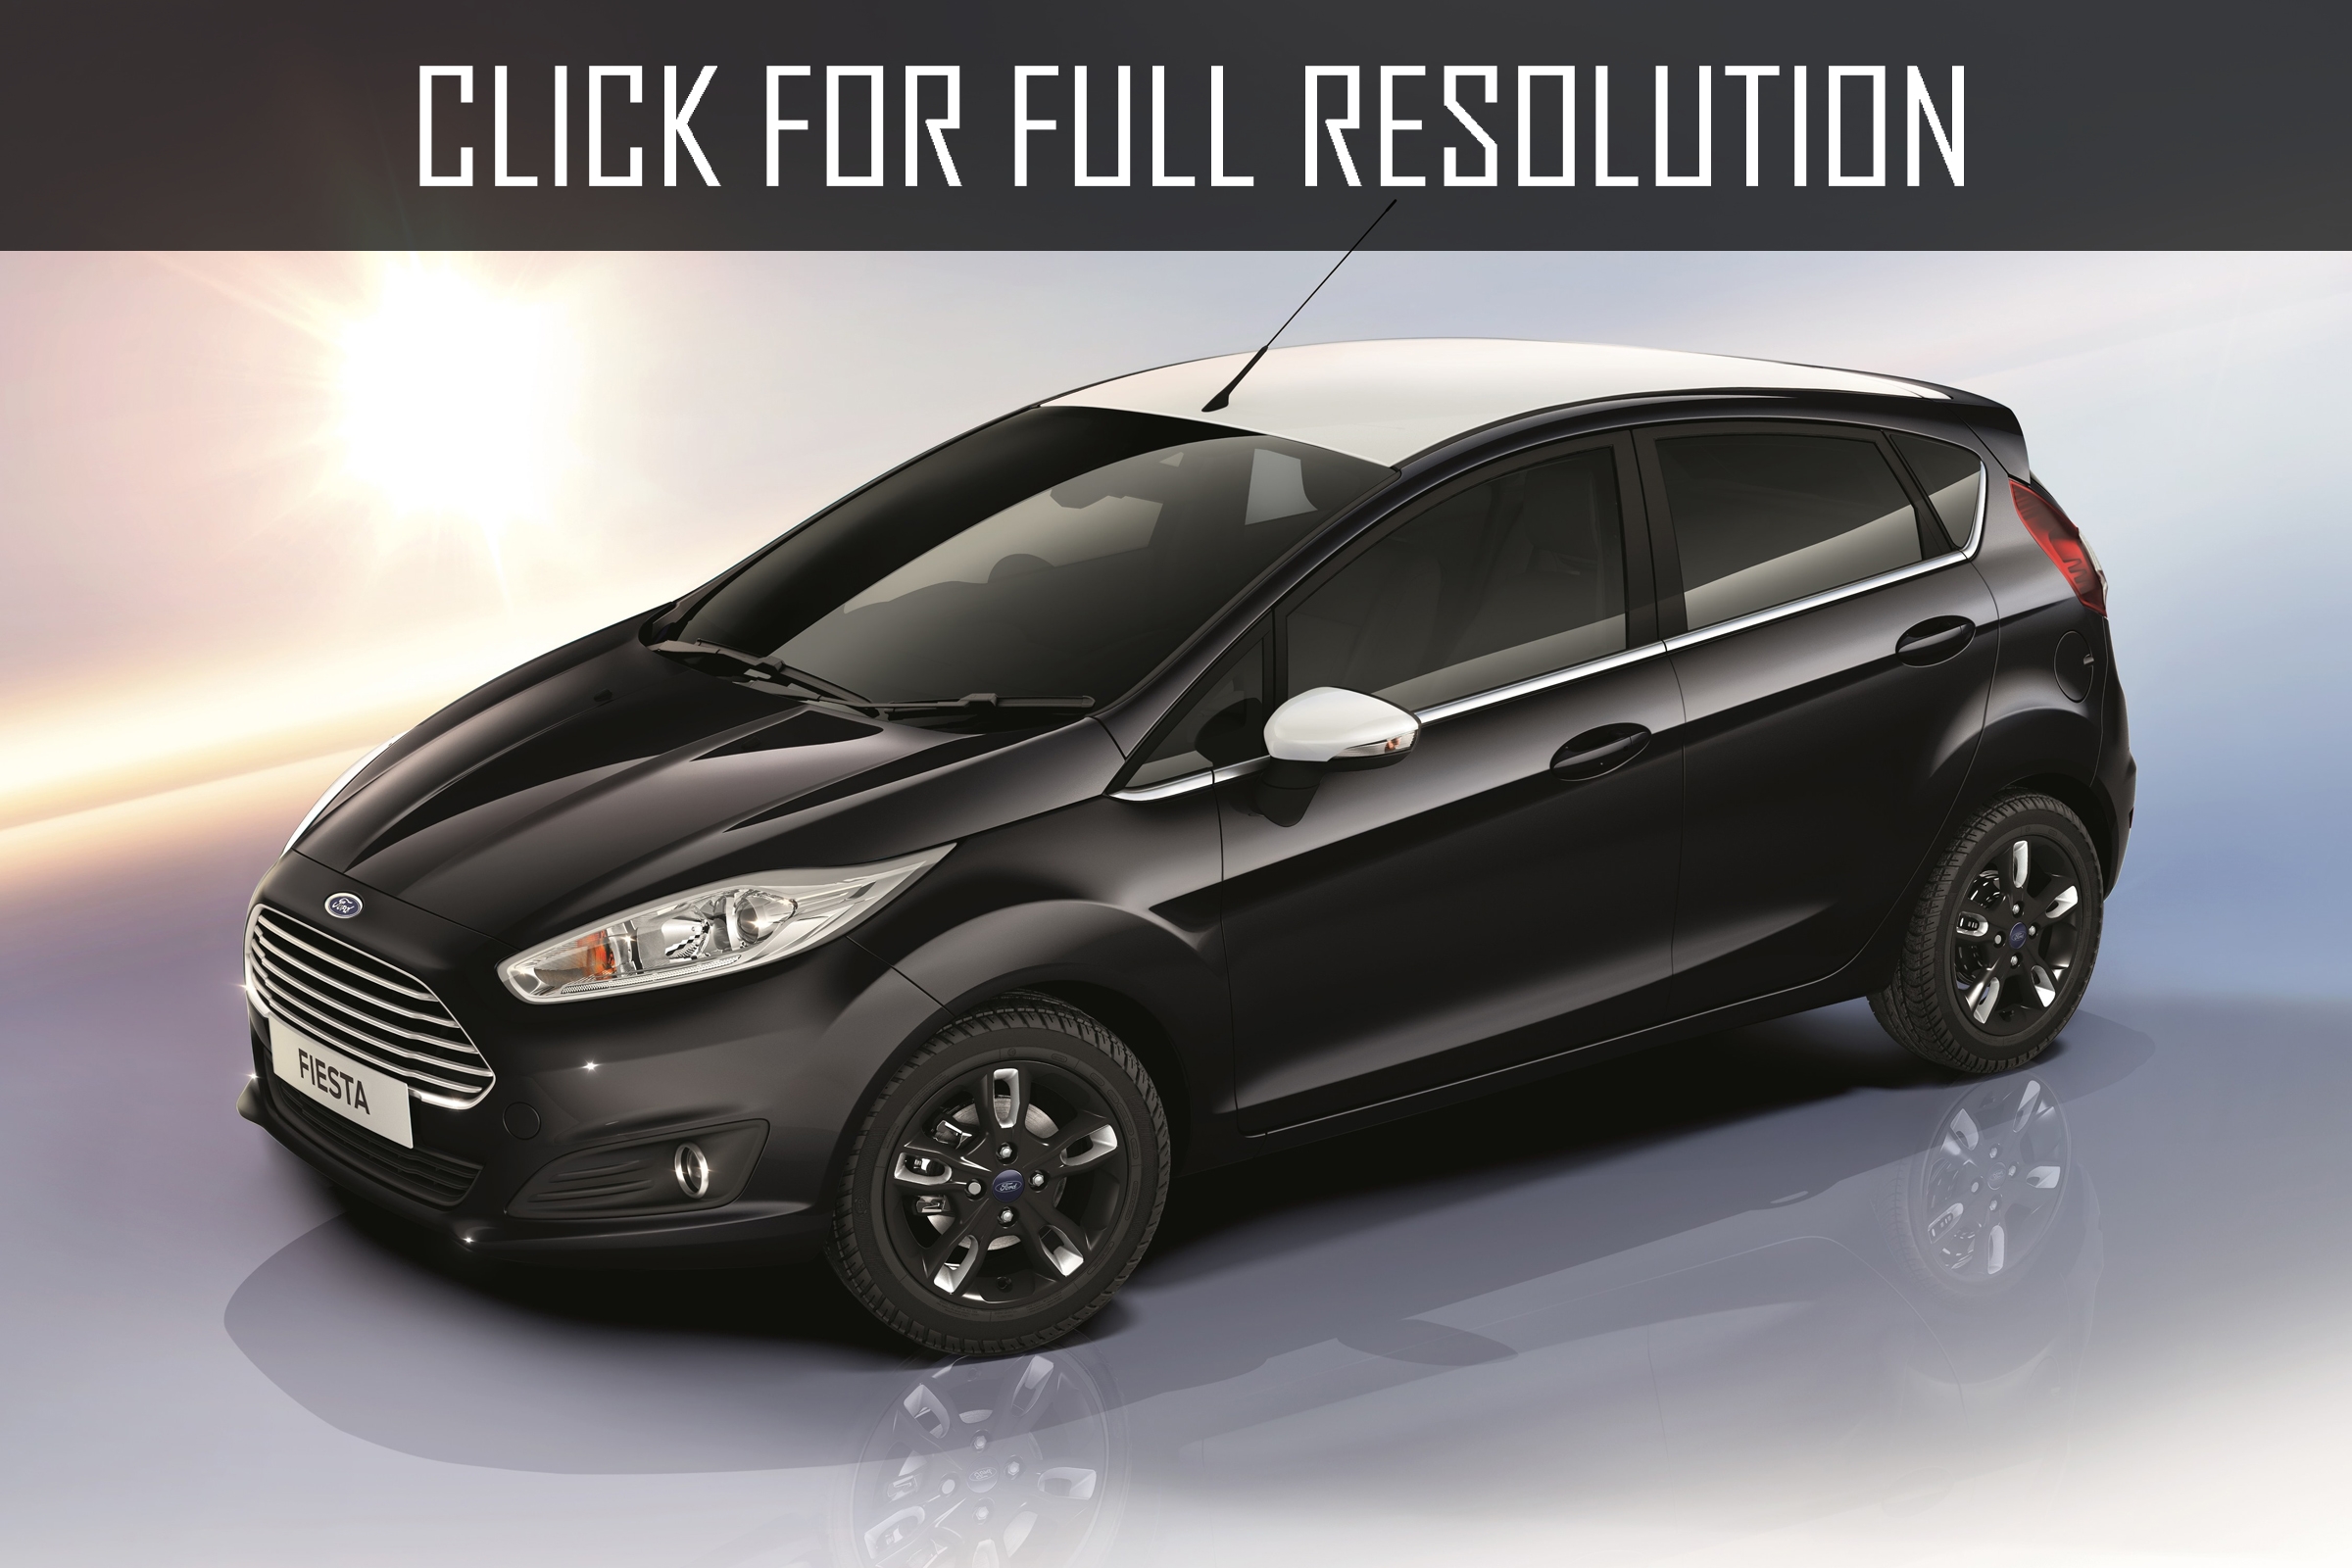 Ford Fiesta Limited Edition